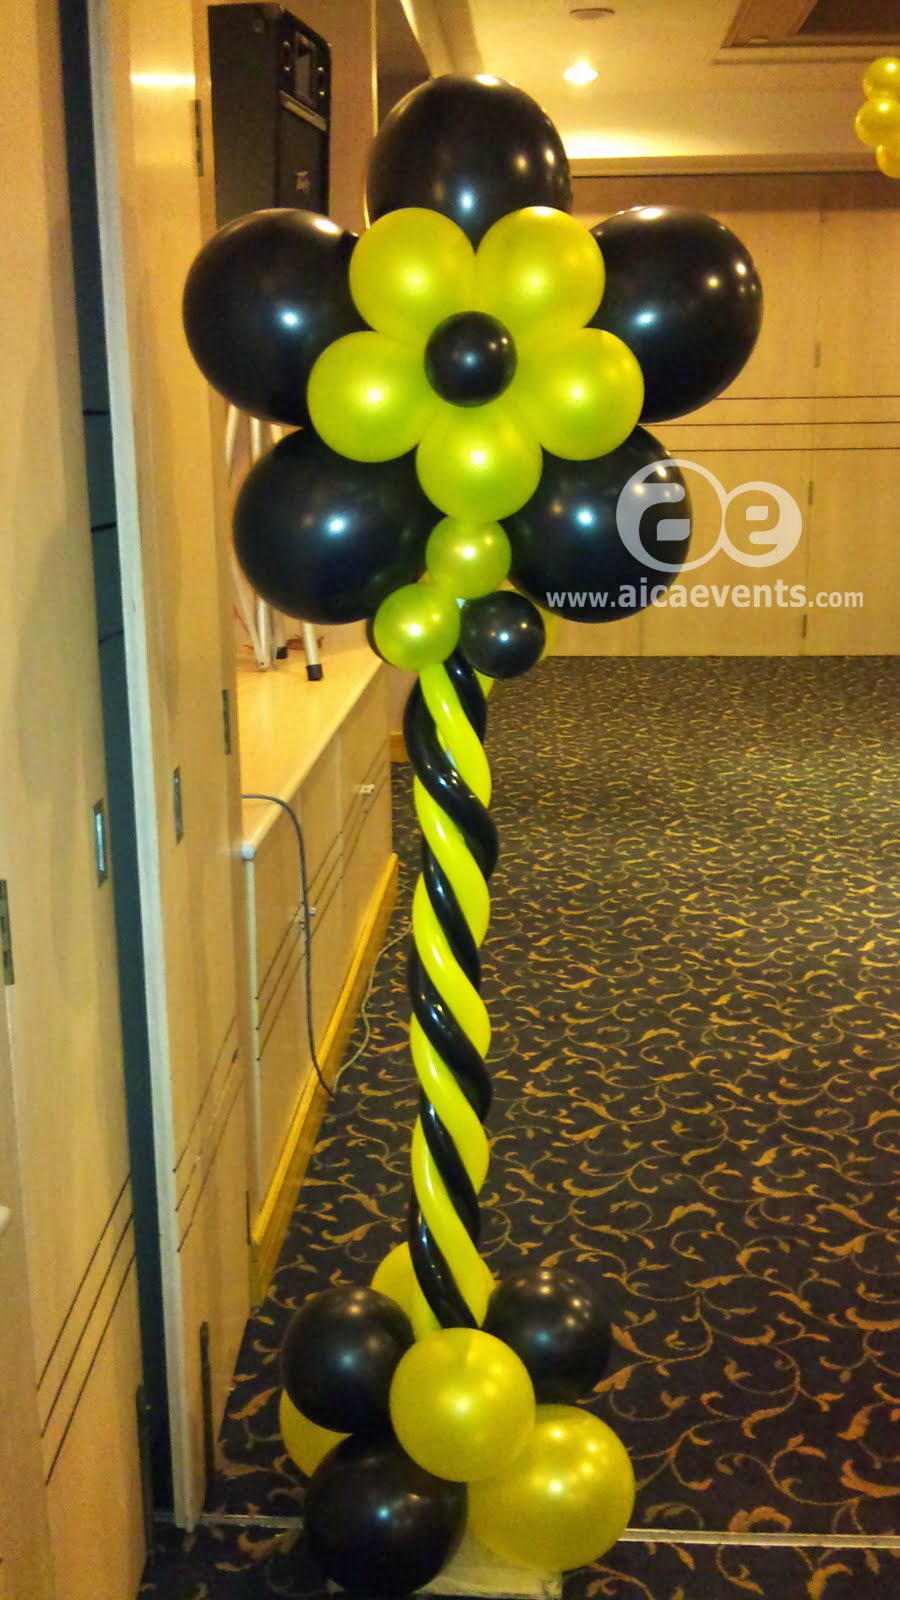 aicaevents Balloon Decorations  for parties